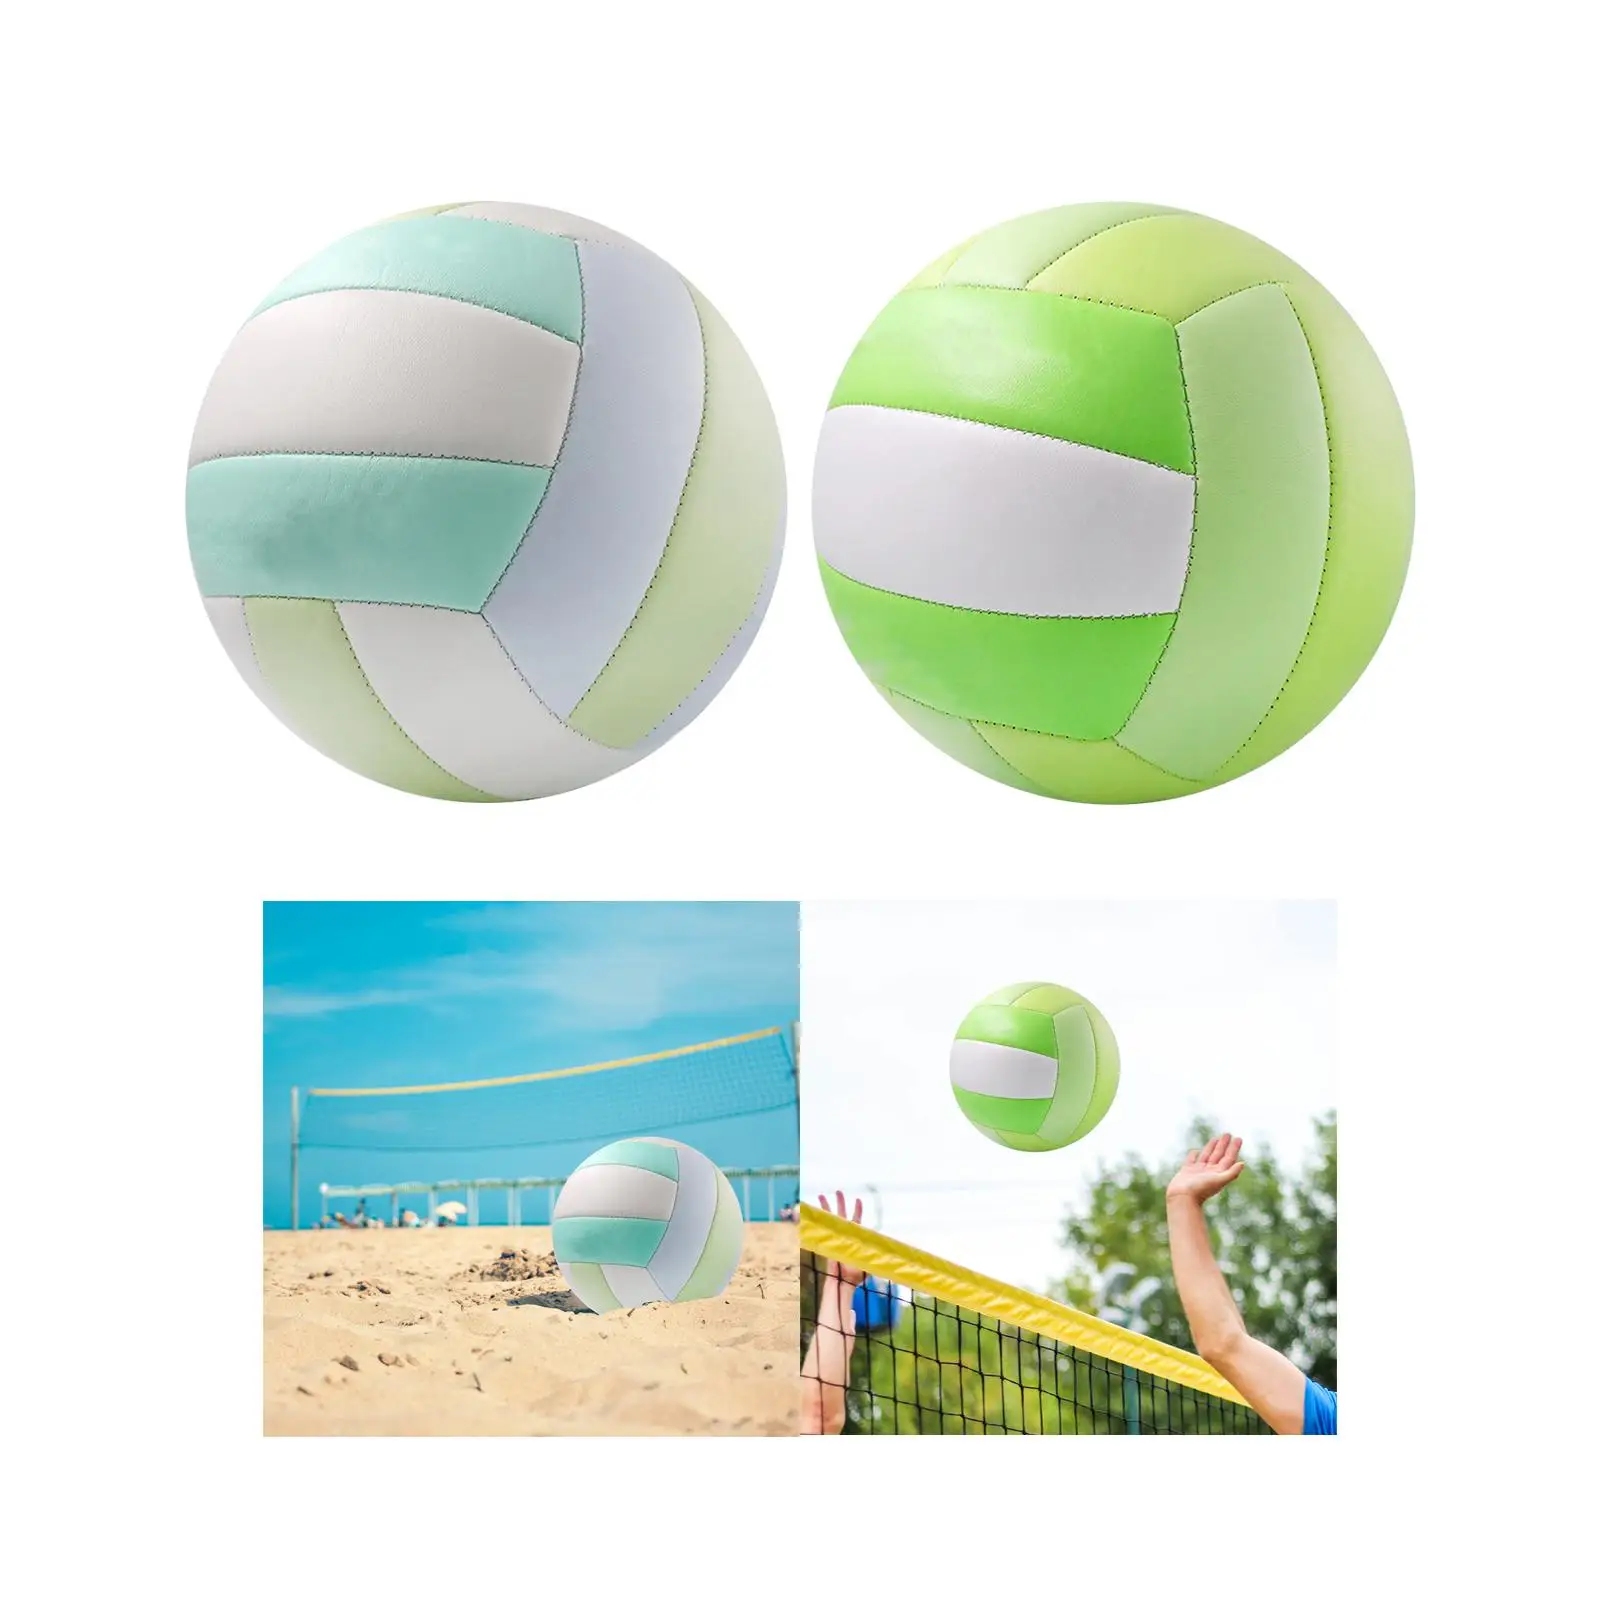 Volley Ball Match Official Size 5 Volleyball for Adults Kids Men Women